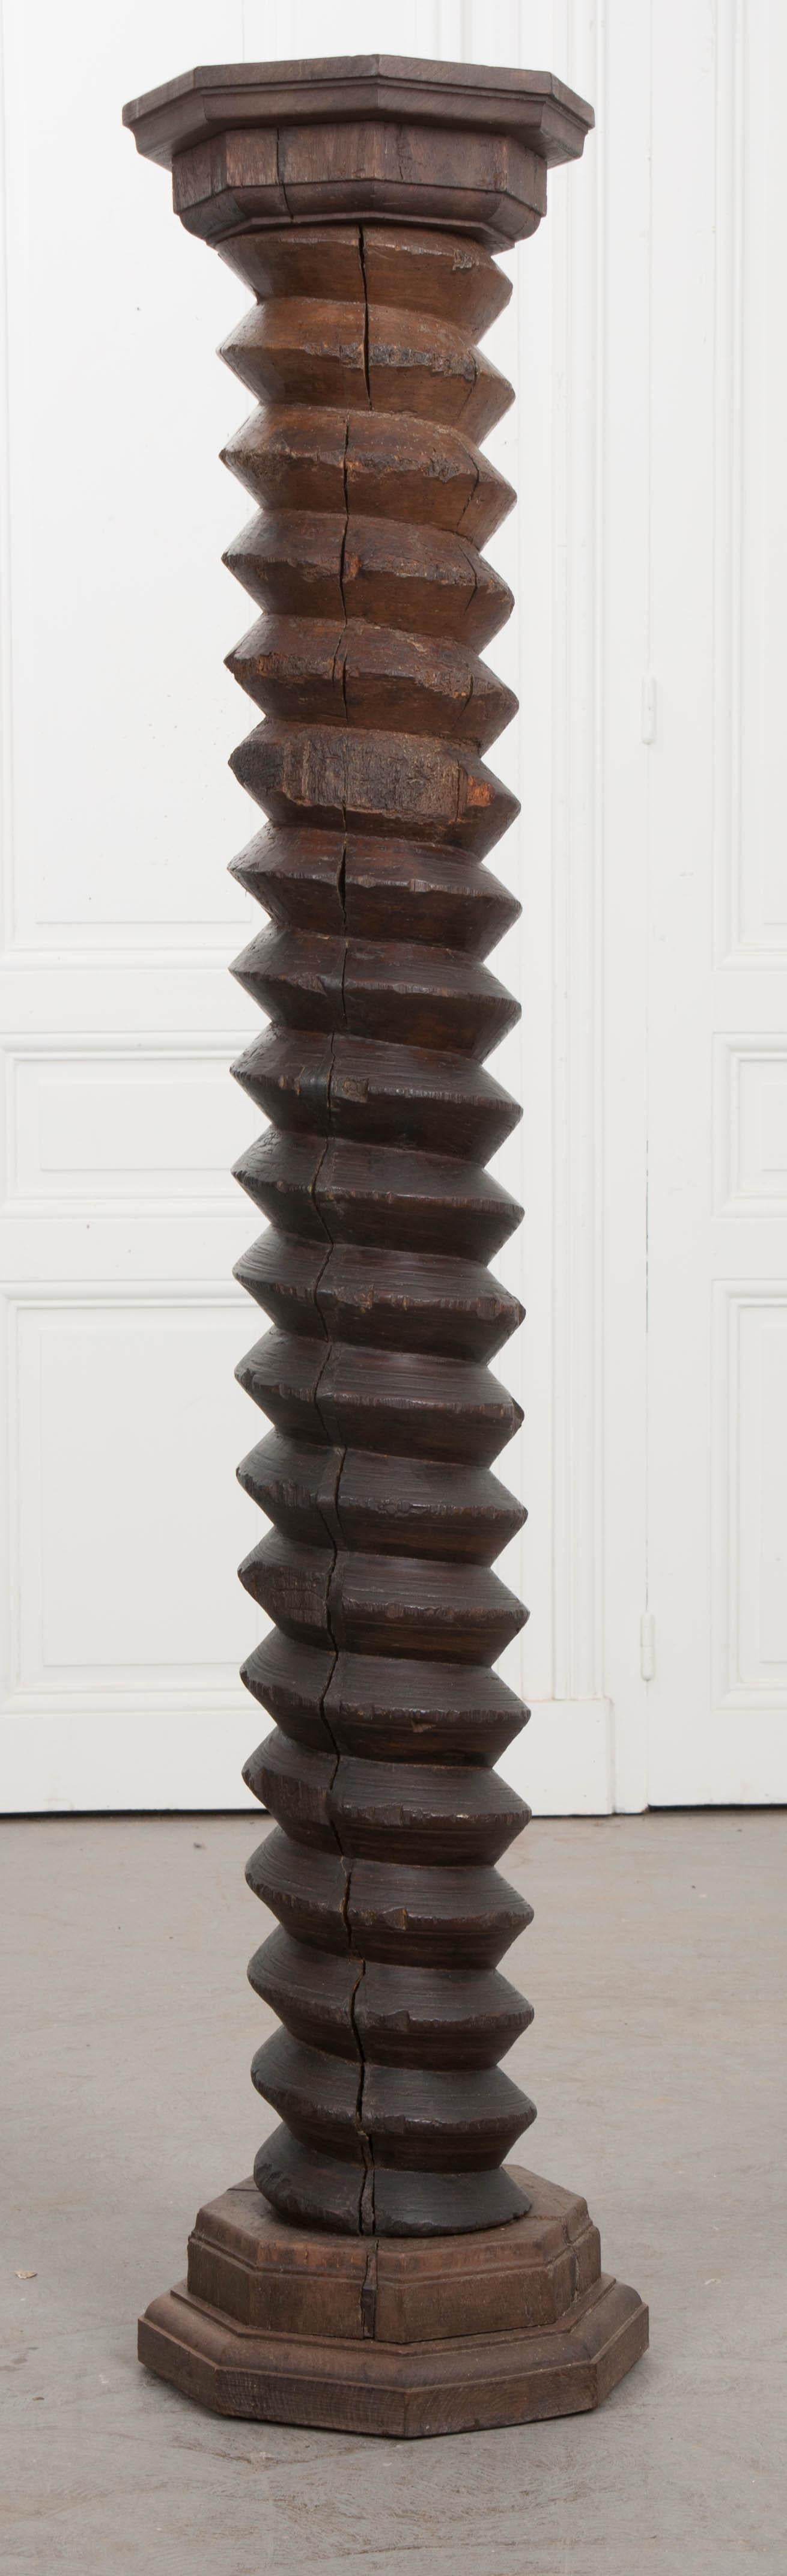 French Provincial French 19th Century Wooden Wine Press Screw